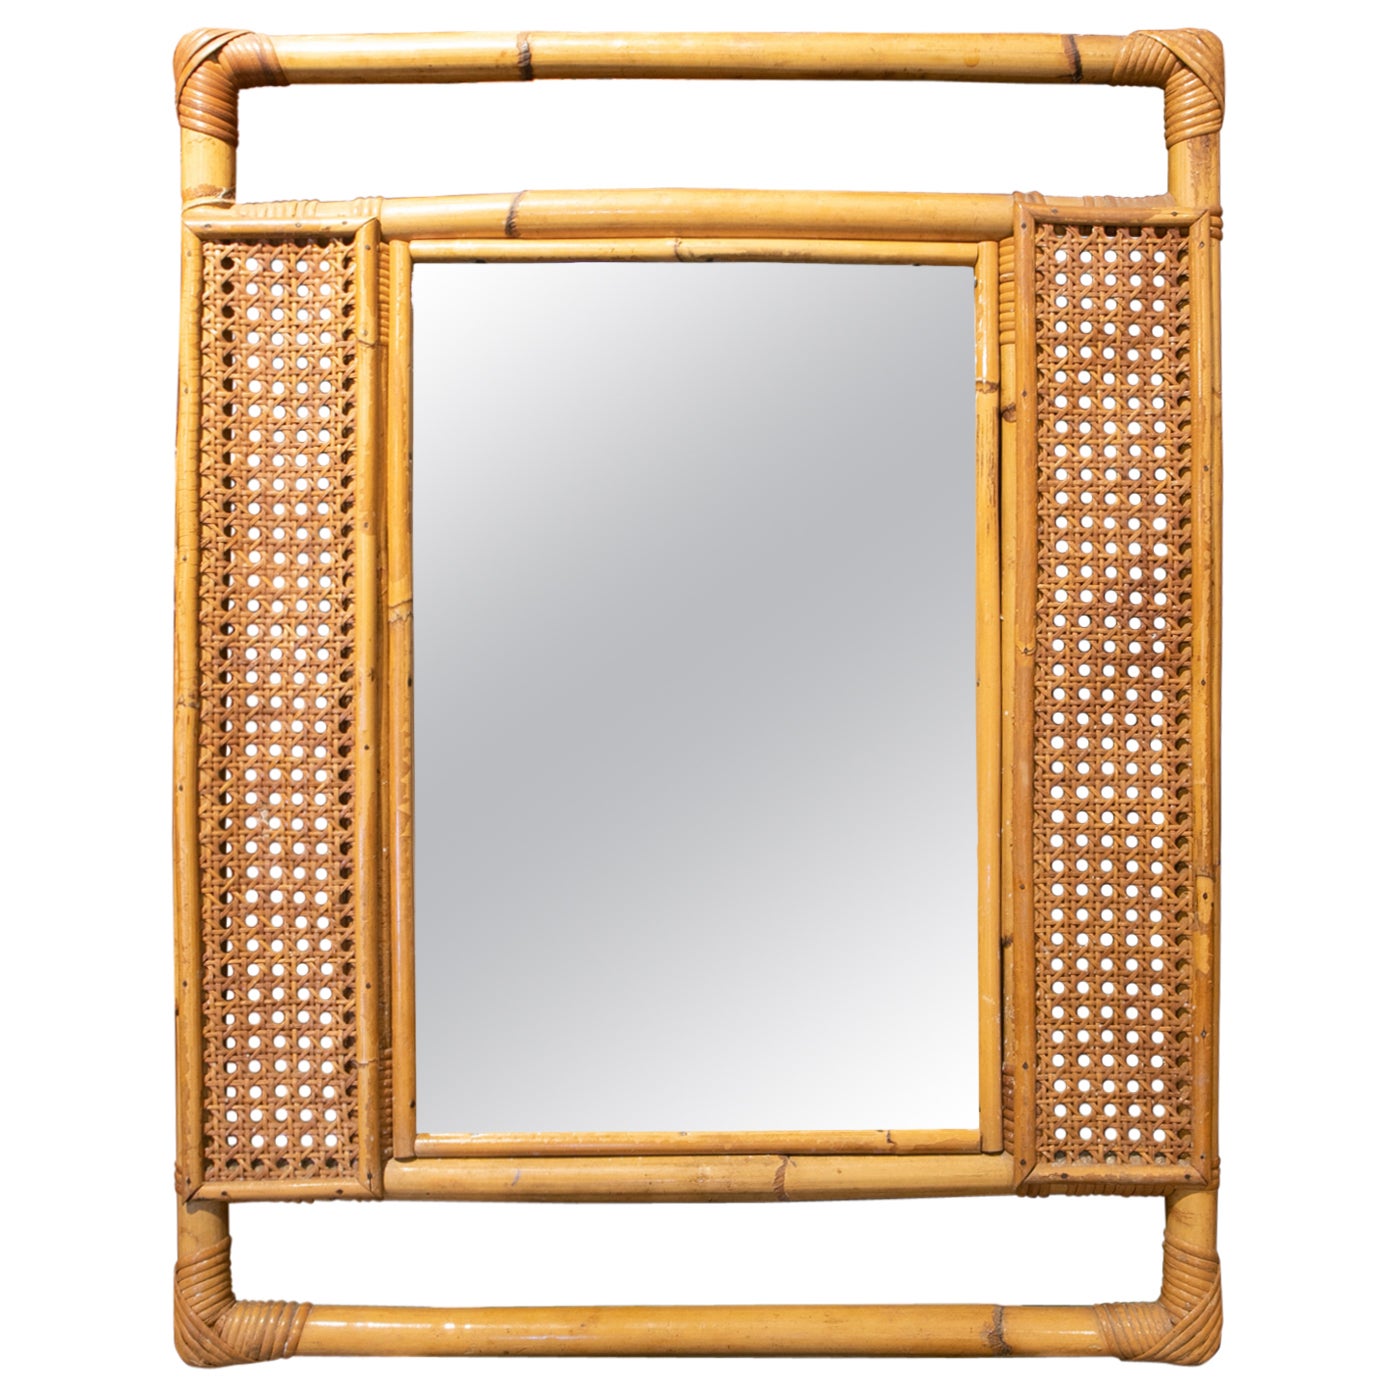 Handmade Bamboo and Rattan Mirror from the 1970ies